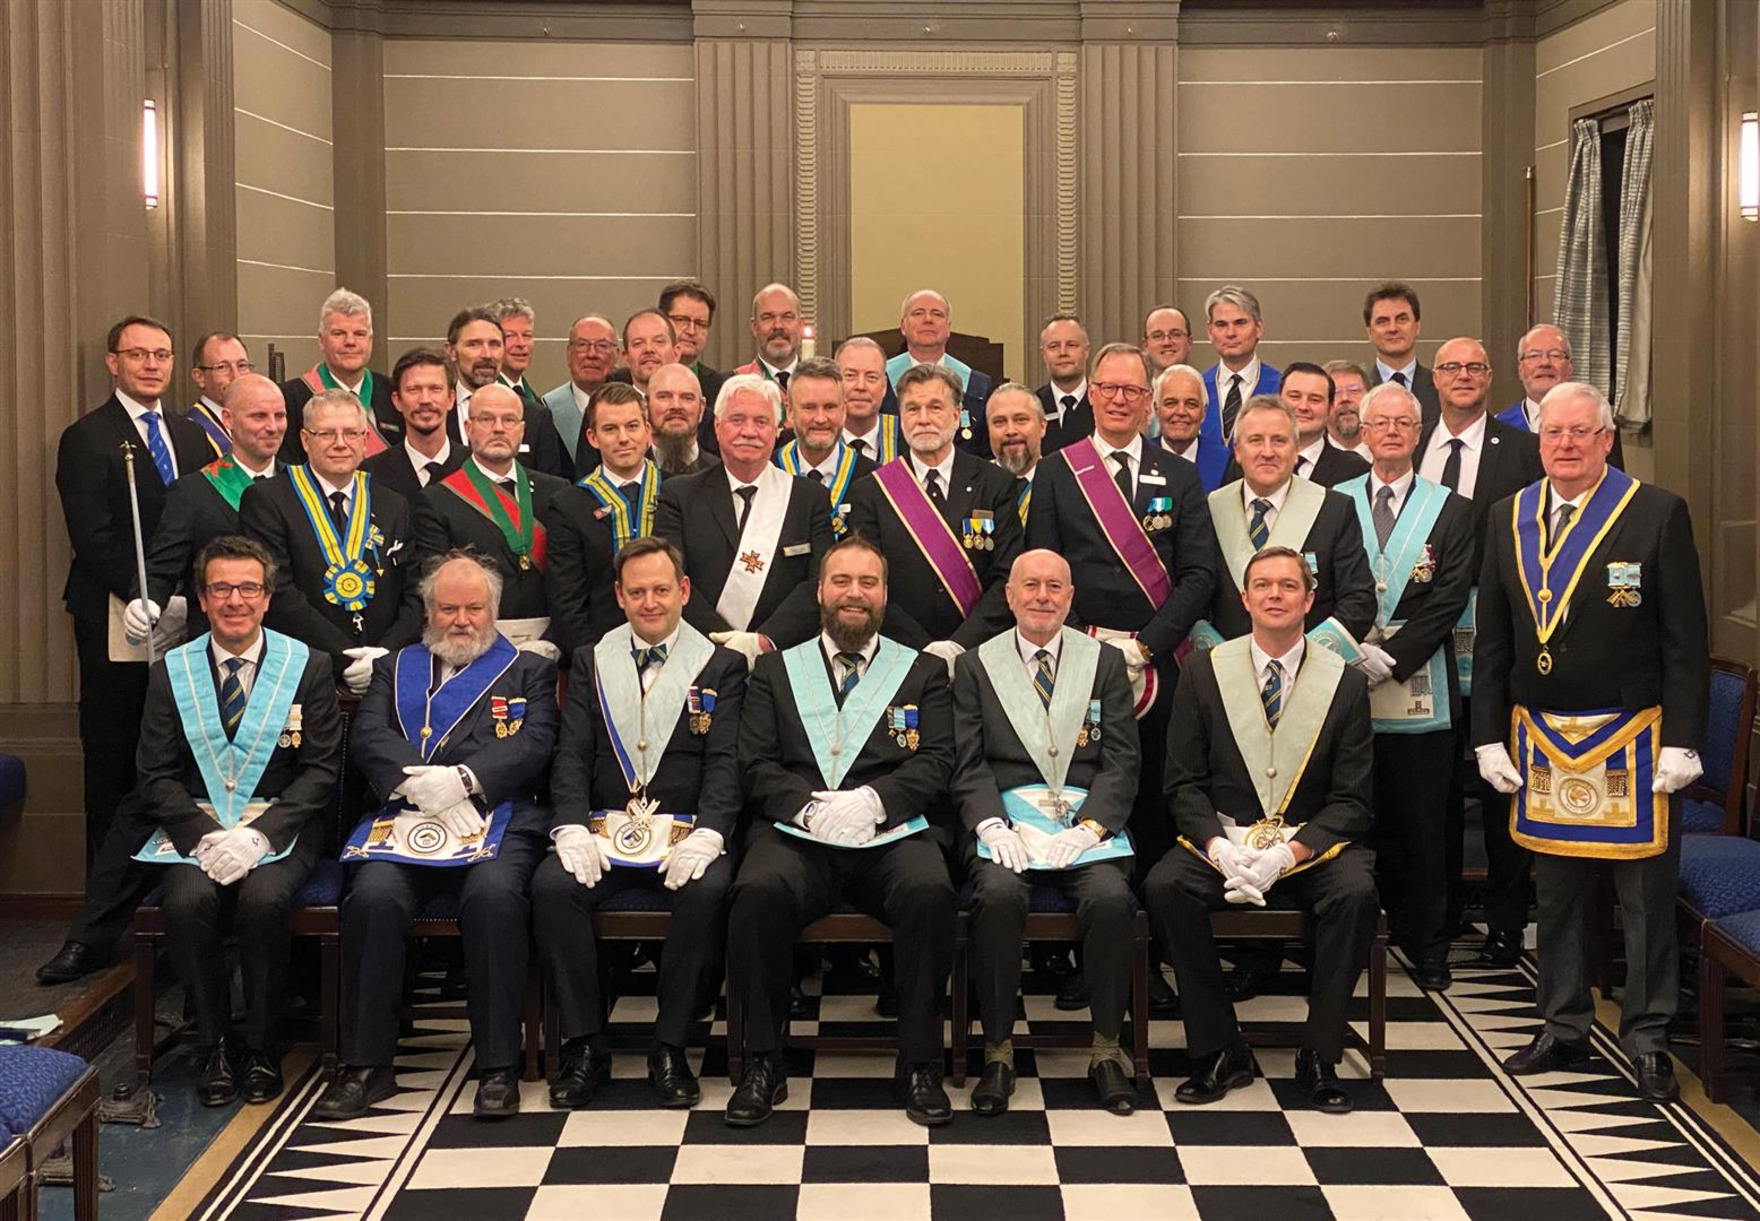 THE OLD REPTONIAN LODGE ESTABLISHES LINKS WITH FREEMASONS FROM SWEDEN